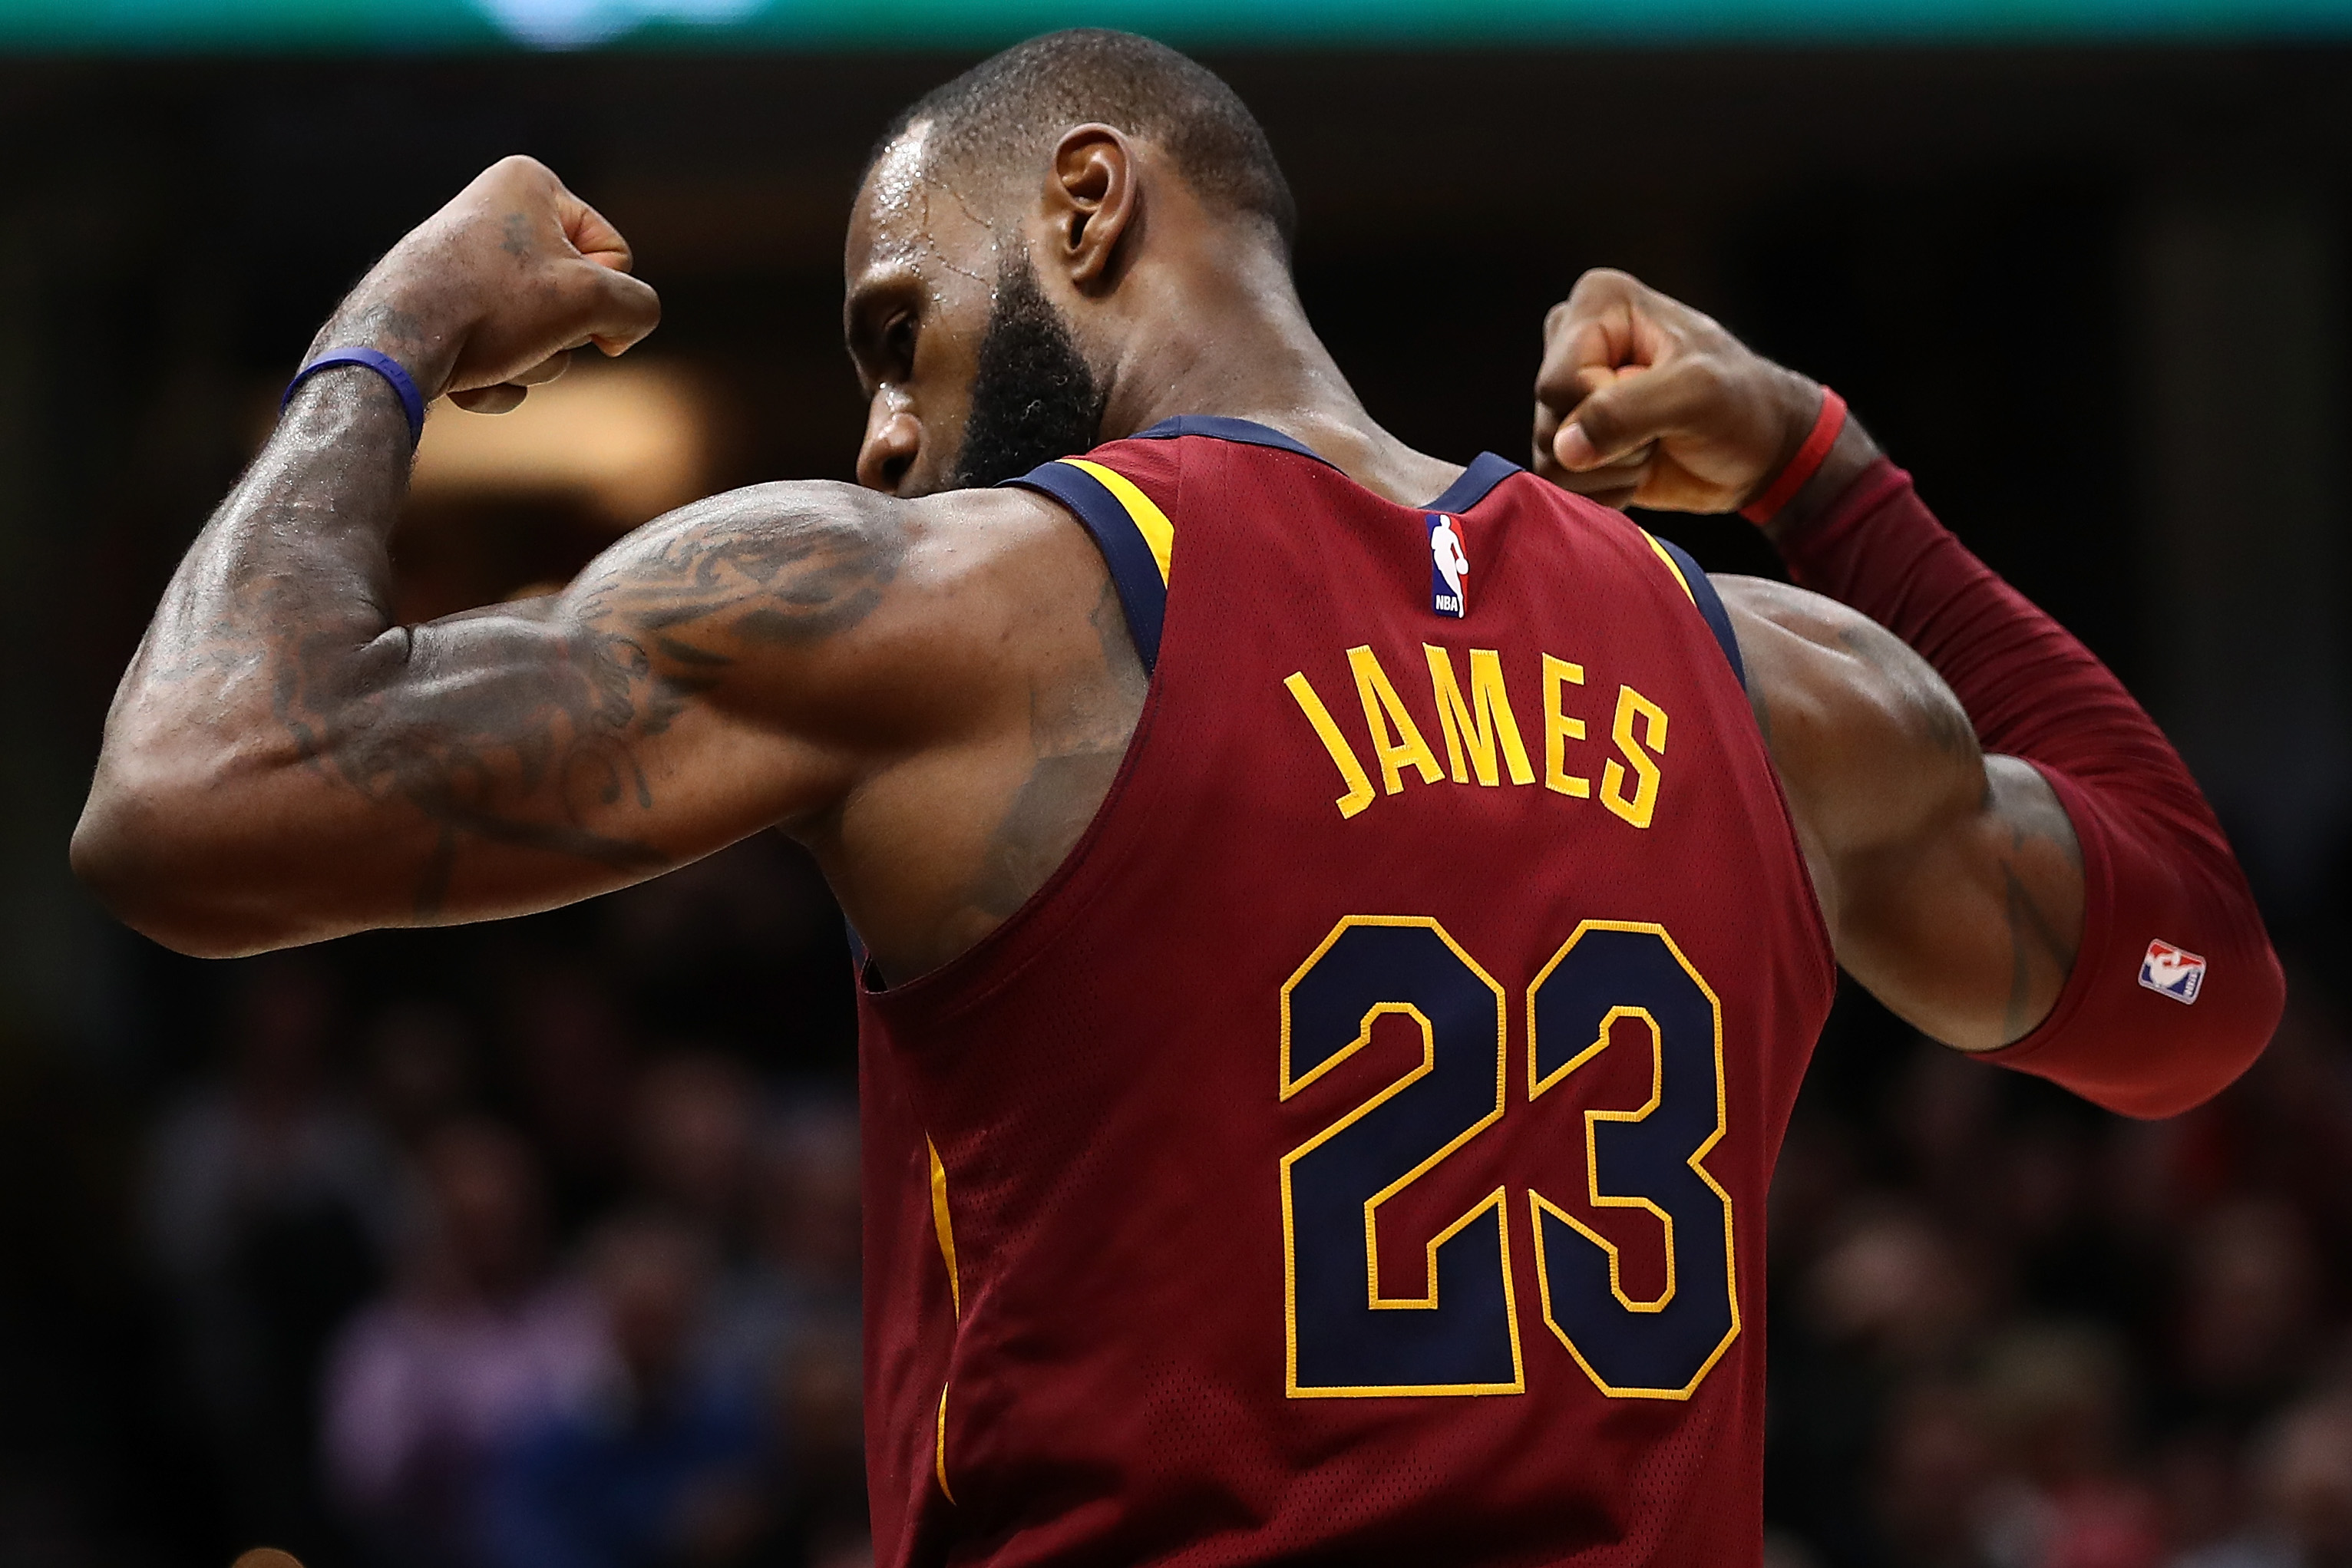 LeBron James #23 of the Cleveland Cavaliers celebrates a second half basket while playing the Indiana Pacers at Quicken Loans Arena on November 1, 2017 in Cleveland, Ohio. (Gregory Shamus—Getty Images)